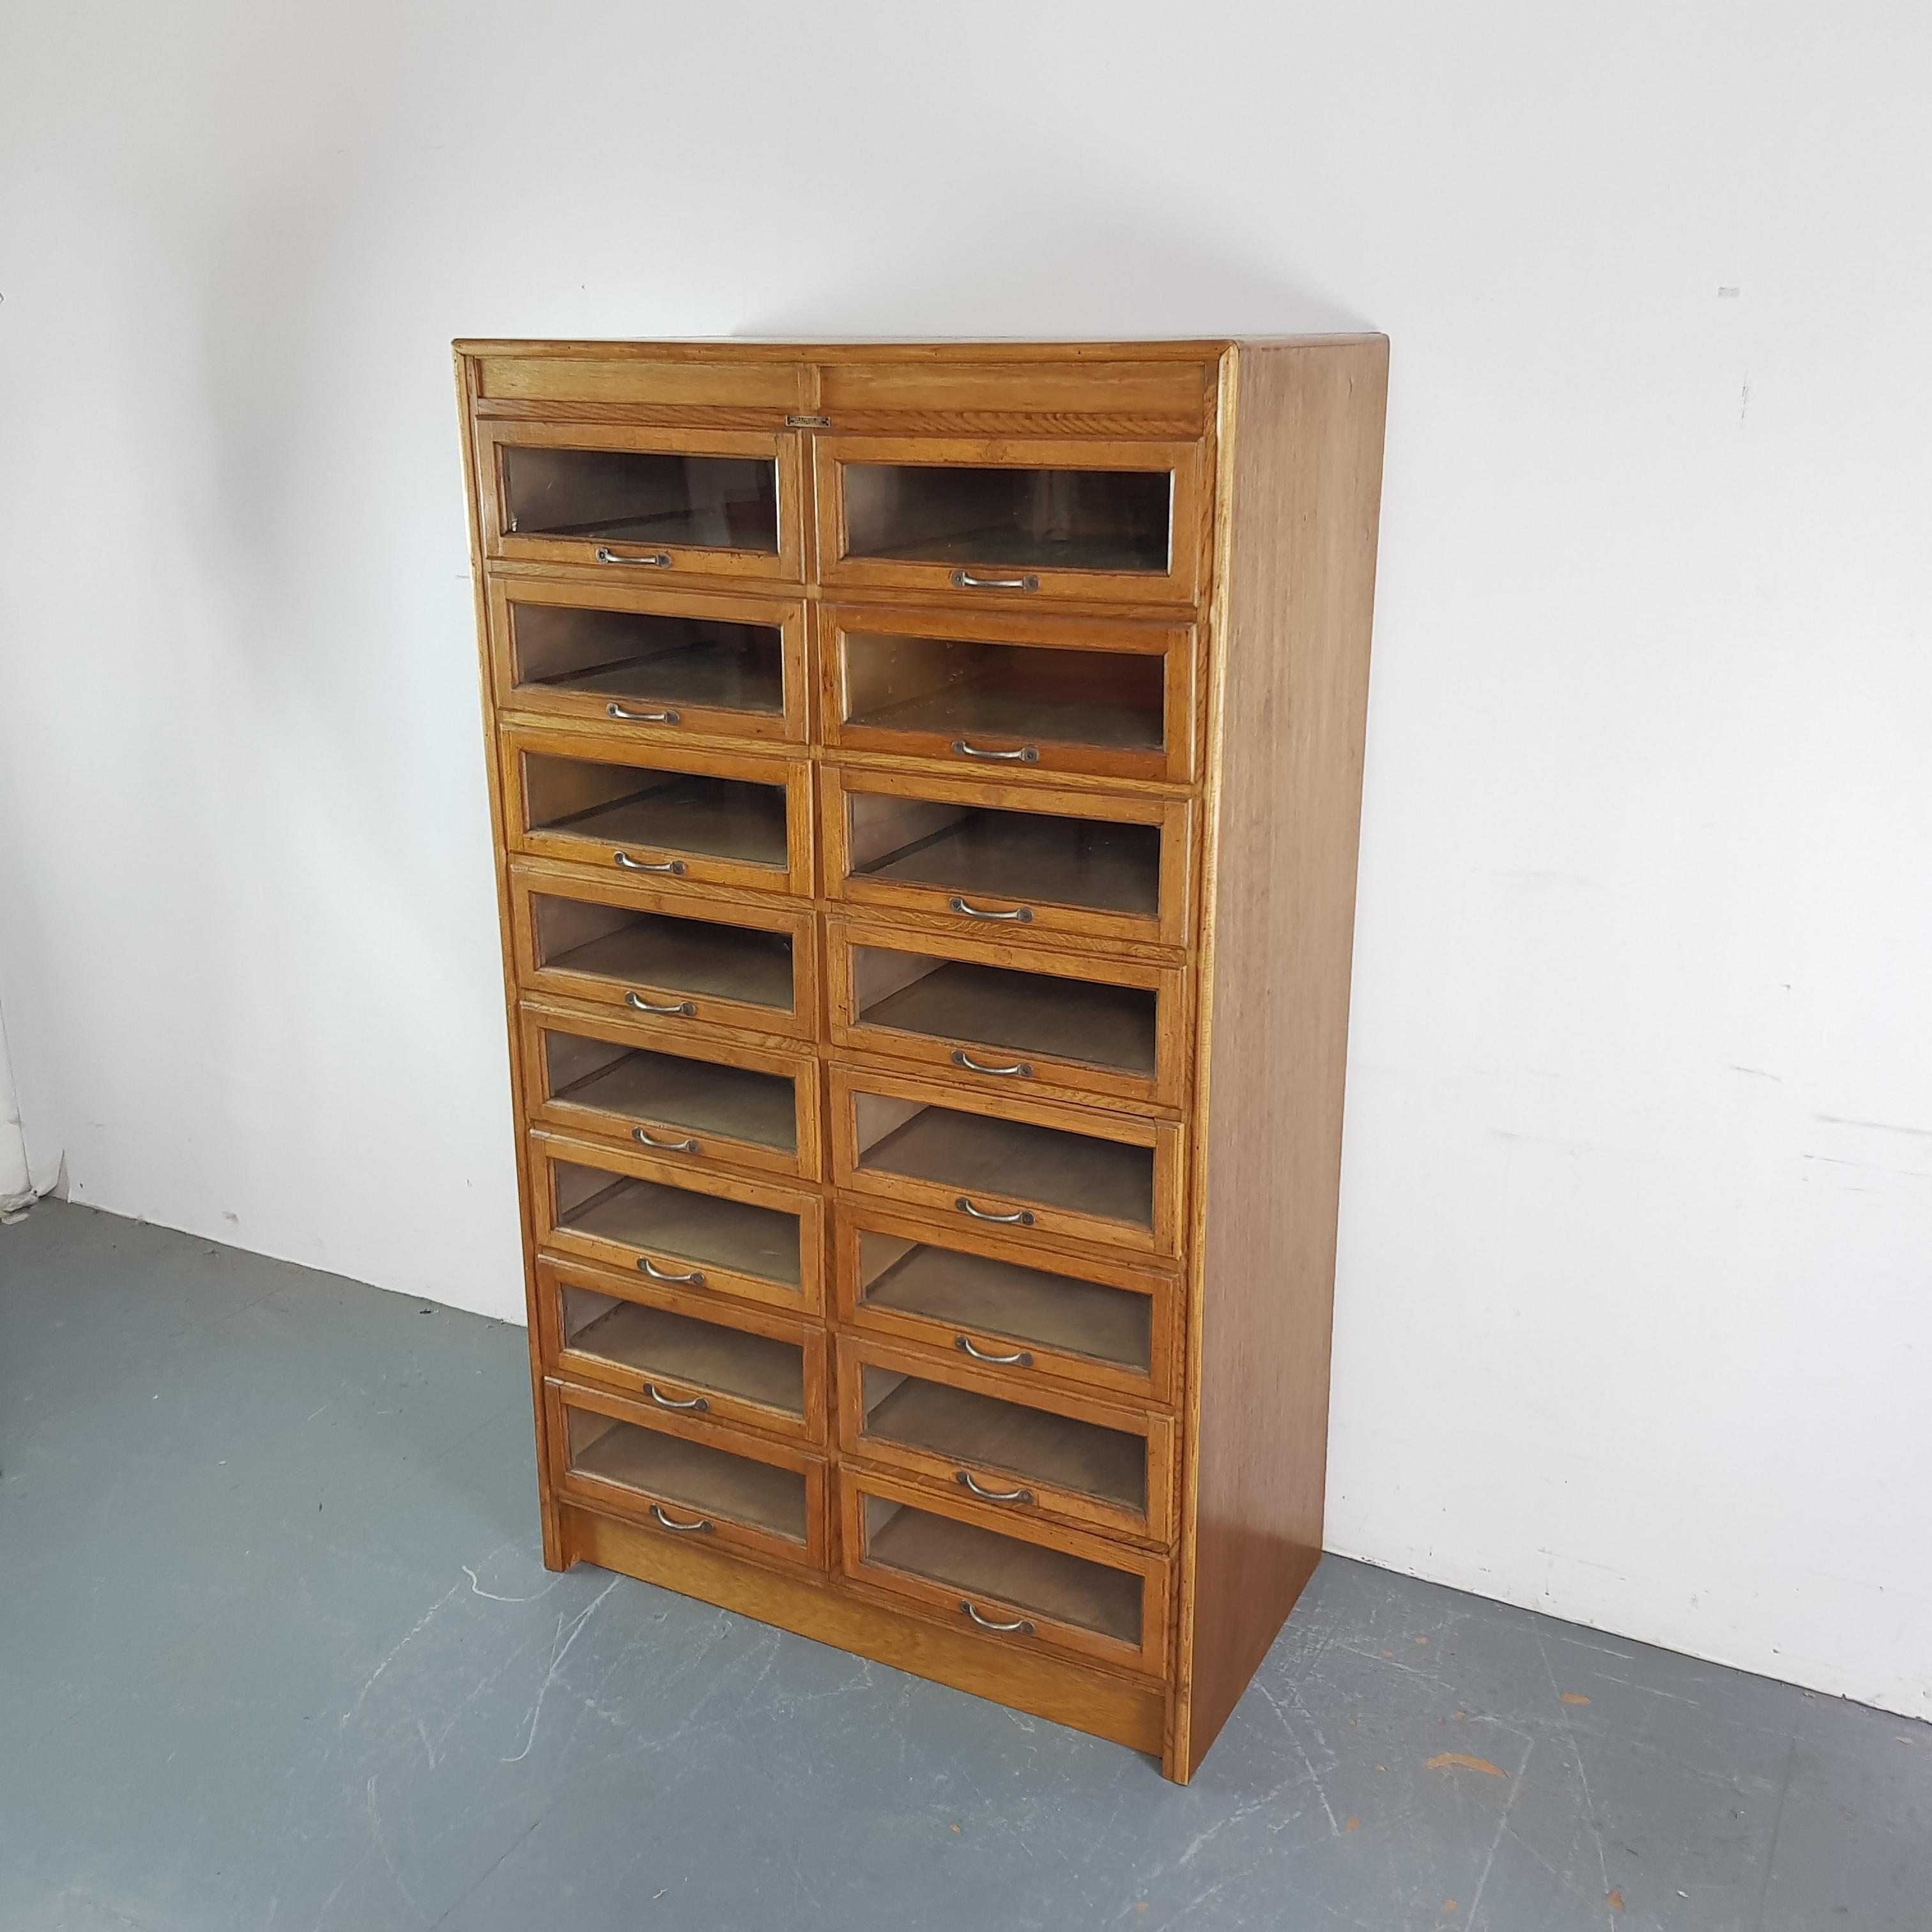 Lovely 16-drawer haberdashery shop cabinet from the 1920s-1930s.

It has 16 glass fronted drawers. 

In good vintage condition. Some scuffs here and there, commensurate with age, but no specific wear to mention. Please bear in mind this has come